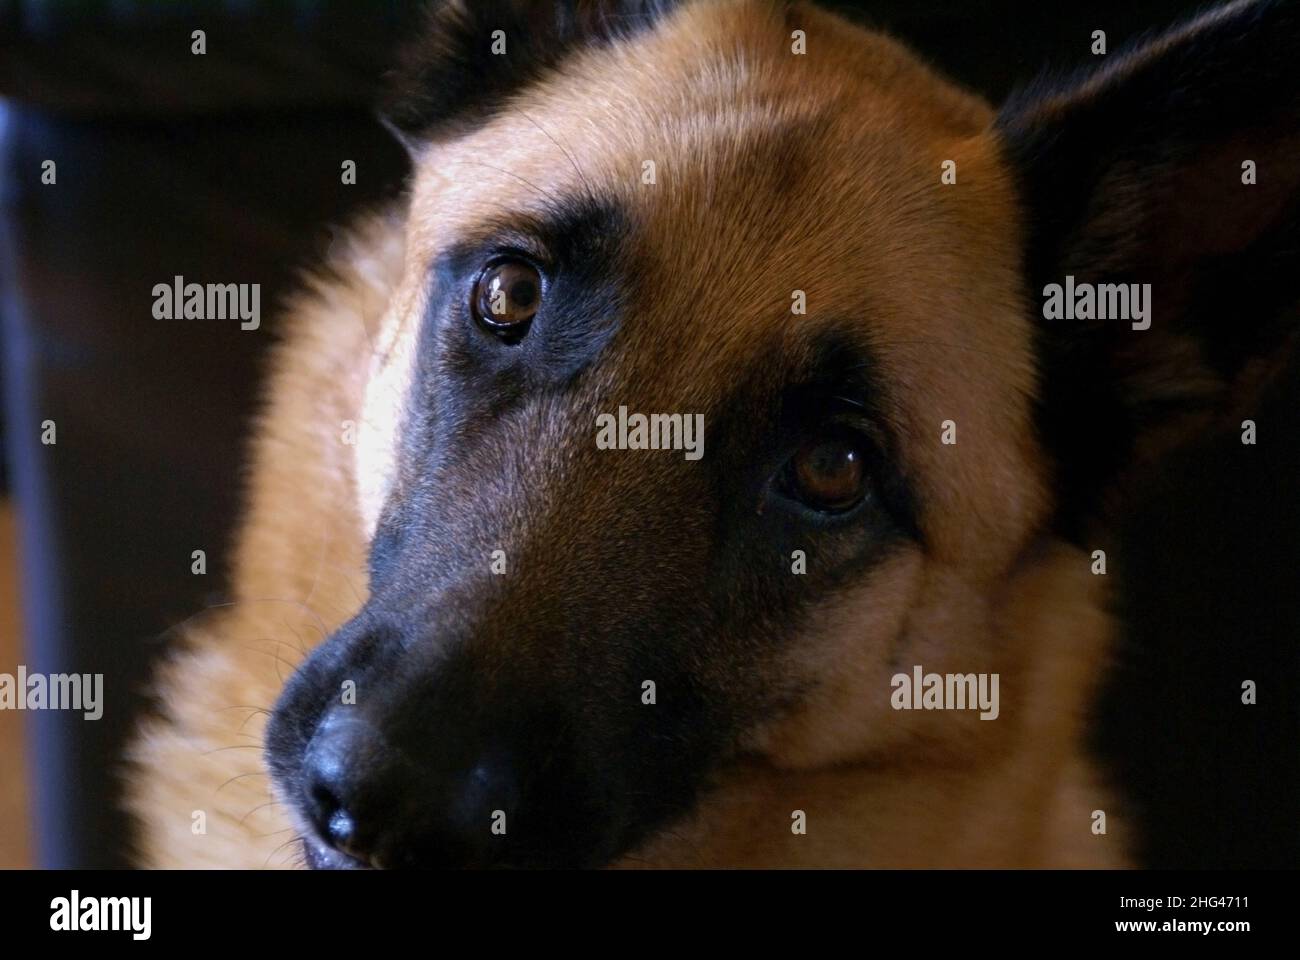 Intimate portrait of a belgian sheperd dog looking straight into the lens. Stock Photo